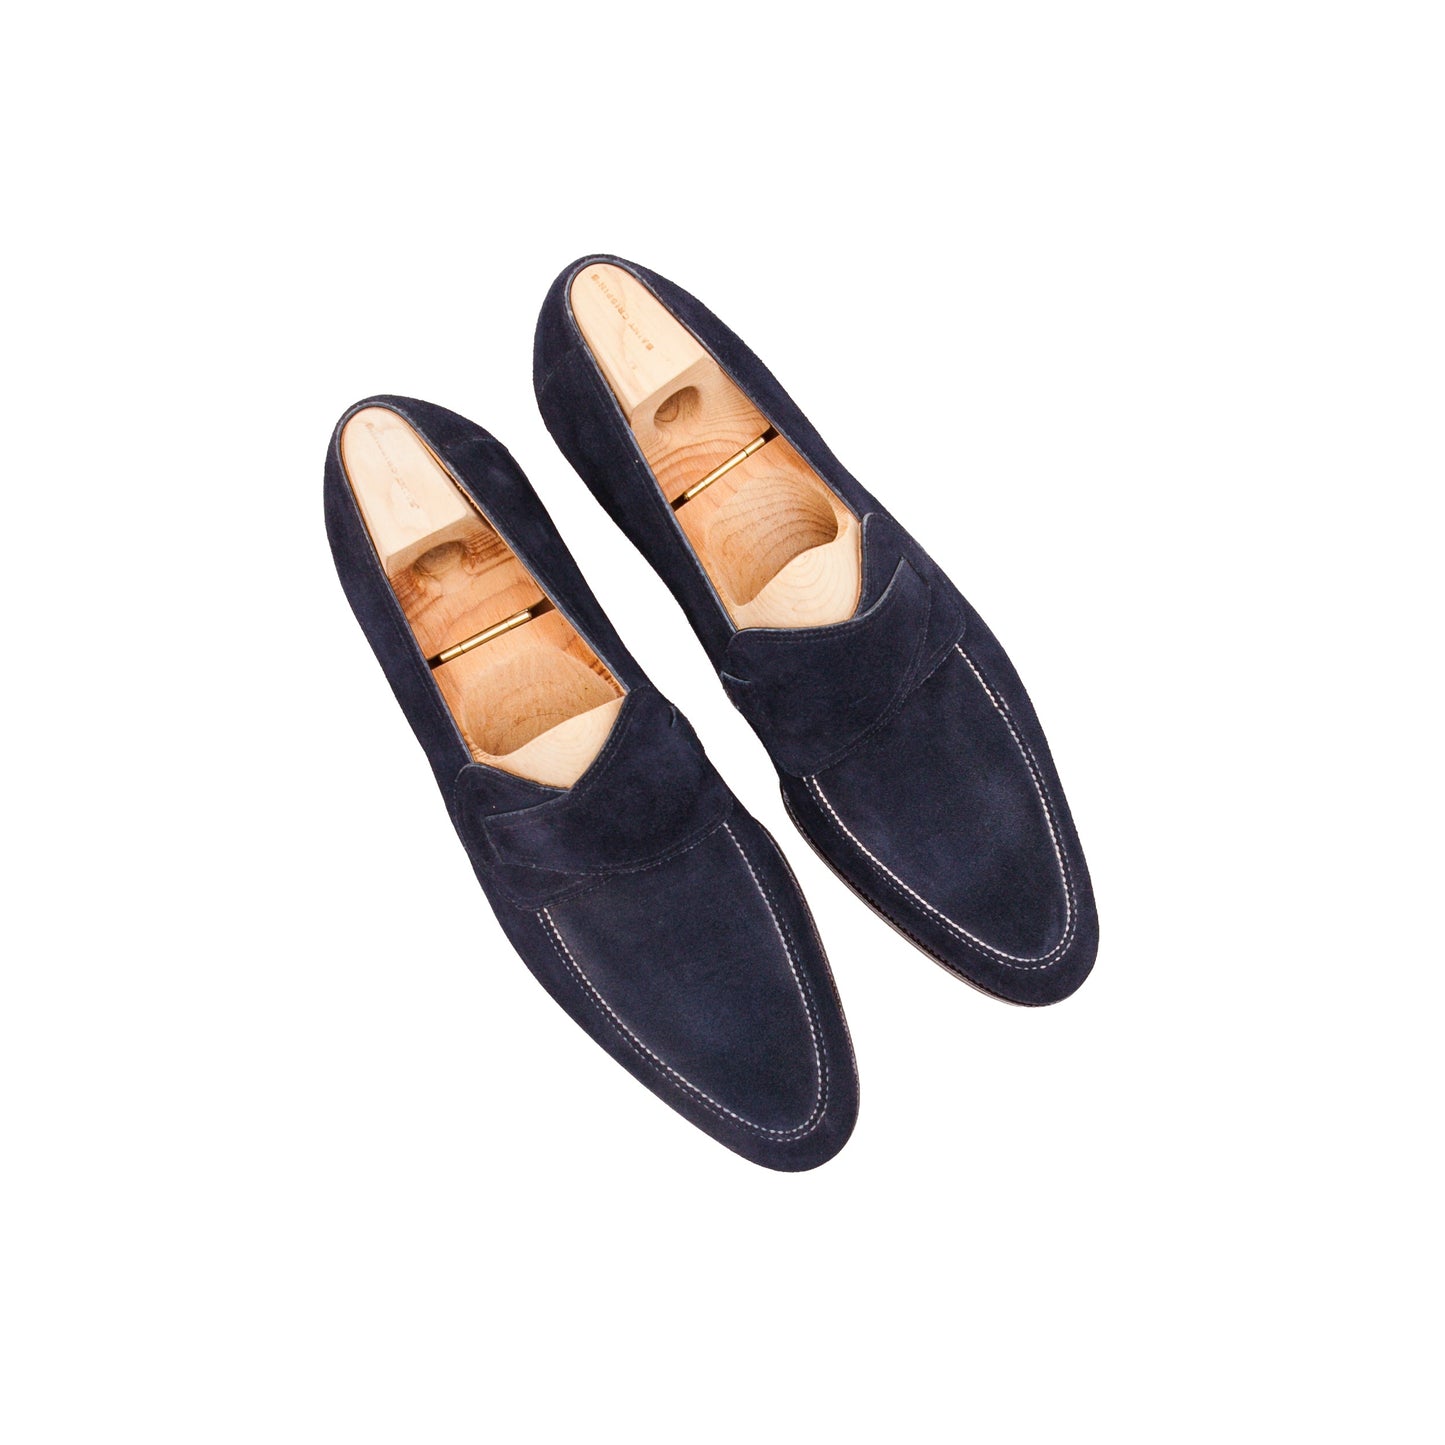 Butterfly loafer with short apron in blue suede